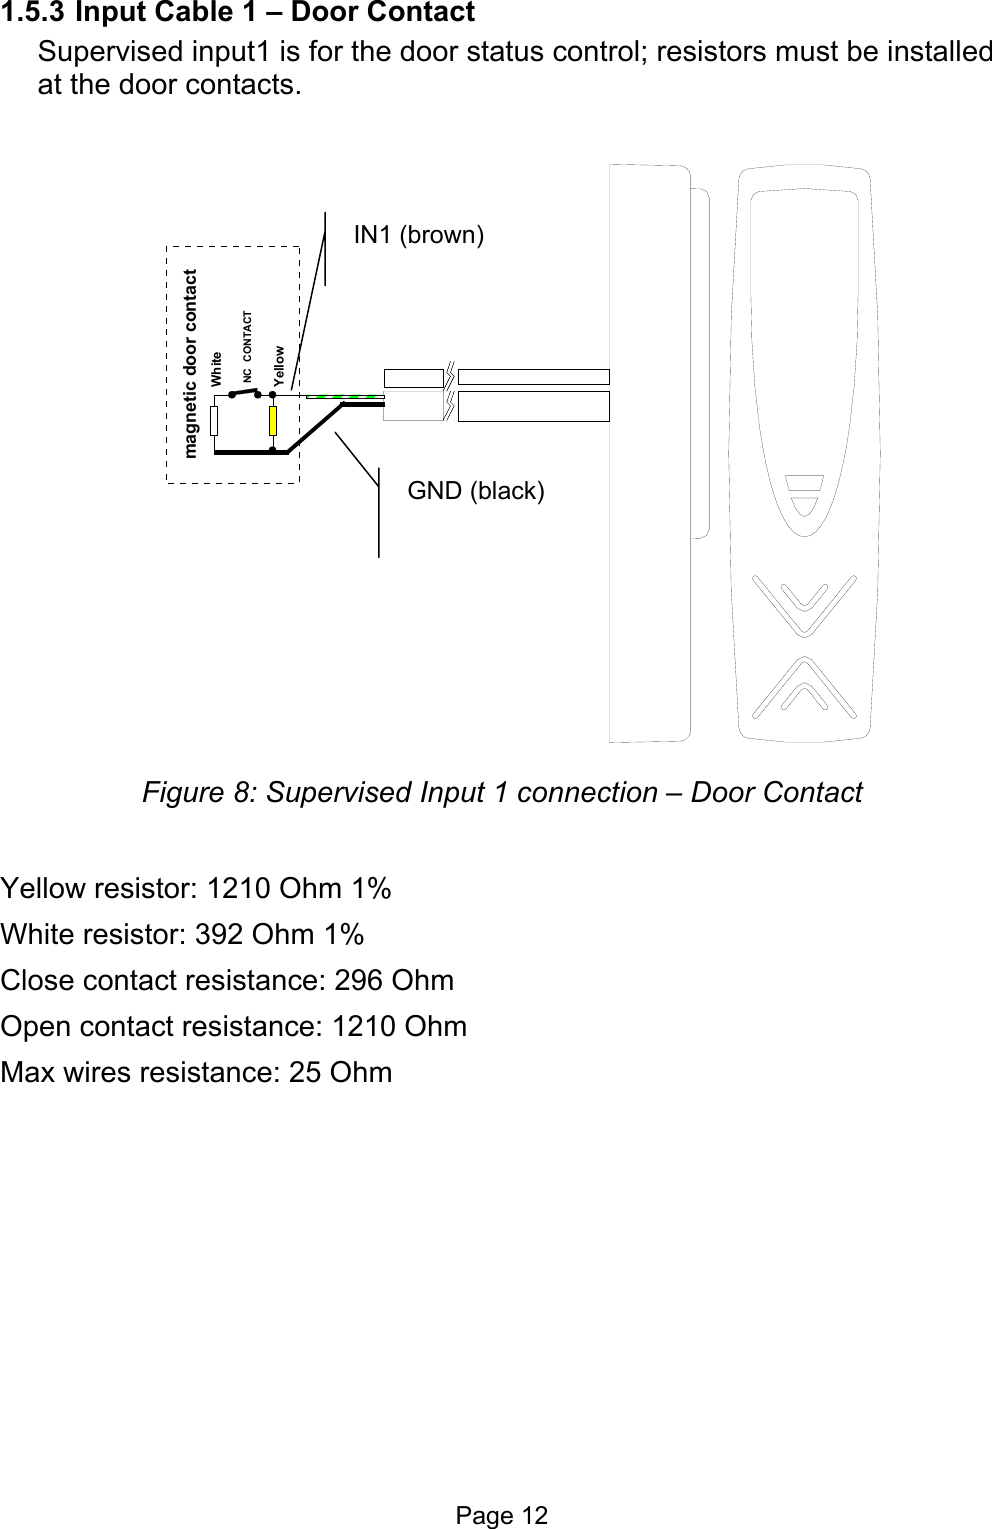  1.5.3 Input Cable 1 – Door Contact Supervised input1 is for the door status control; resistors must be installed at the door contacts.  WhiteYellowmagnetic door contactNC  CONTACT Figure 8: Supervised Input 1 connection – Door Contact IN1 (brown) GND (black)  Yellow resistor: 1210 Ohm 1% White resistor: 392 Ohm 1% Close contact resistance: 296 Ohm Open contact resistance: 1210 Ohm Max wires resistance: 25 Ohm    Page 12 